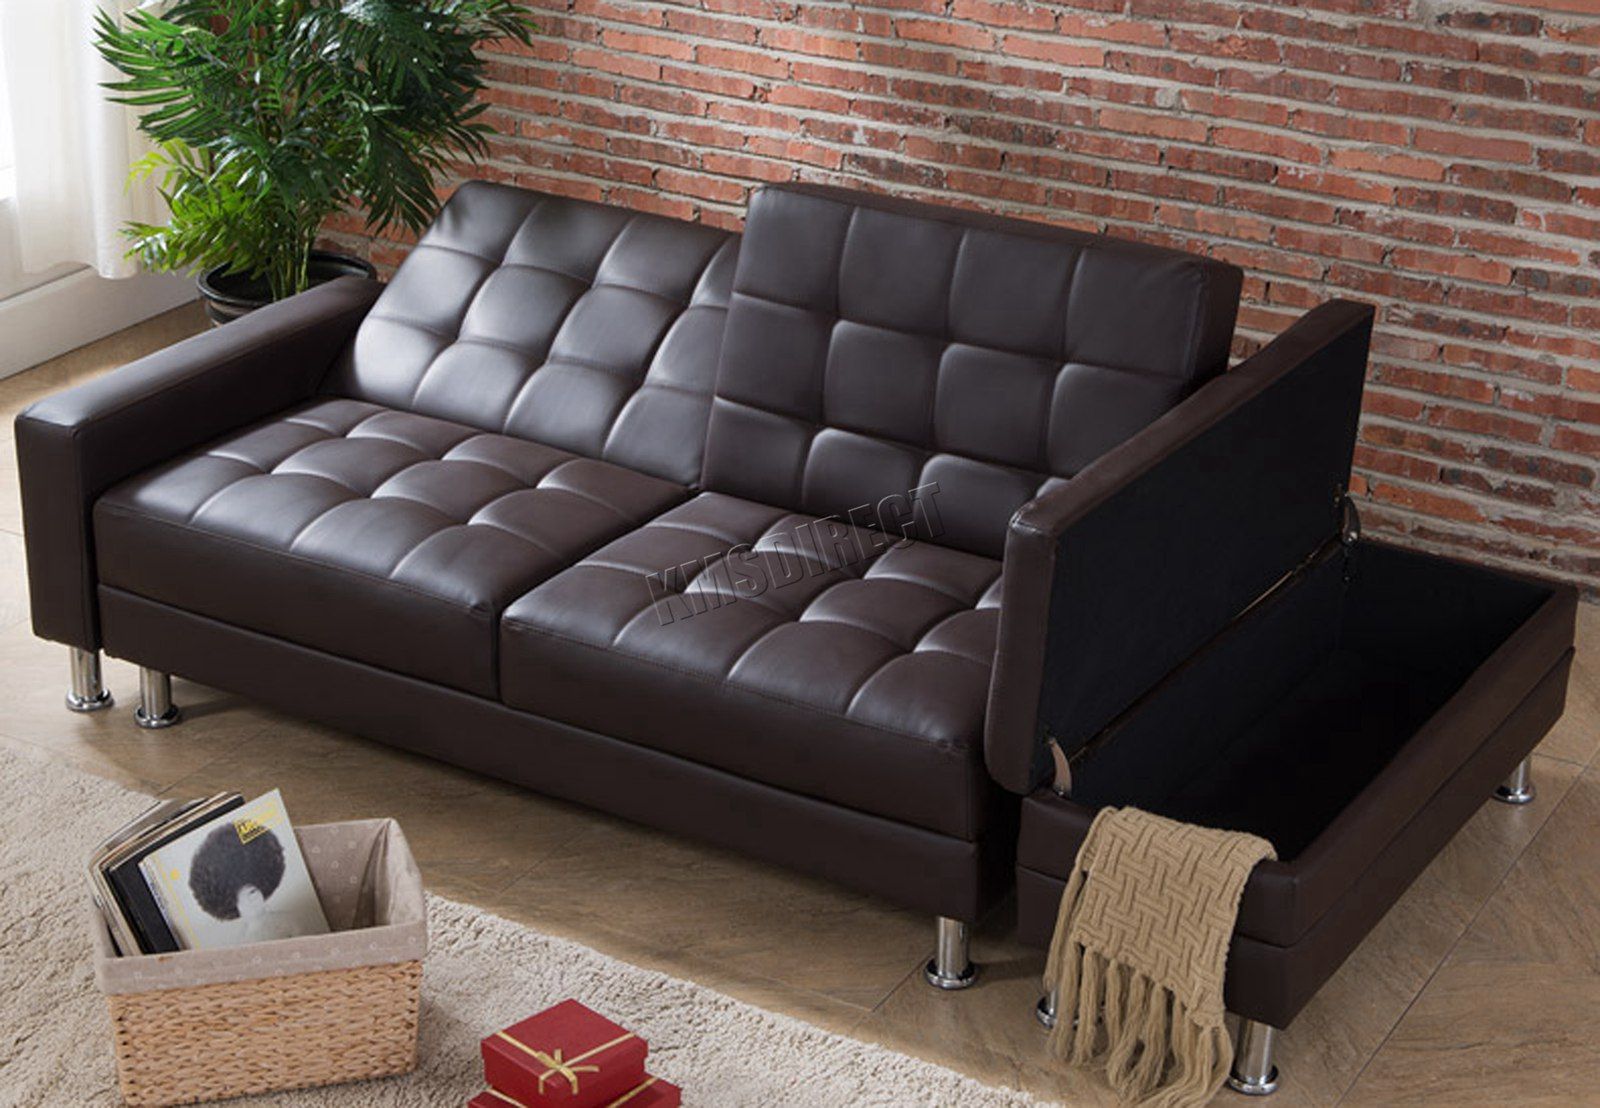 Westwood Pu Sofa Bed With Storage 3 Seater Guest Sleeper Within Liberty Sectional Futon Sofas With Storage (View 1 of 15)